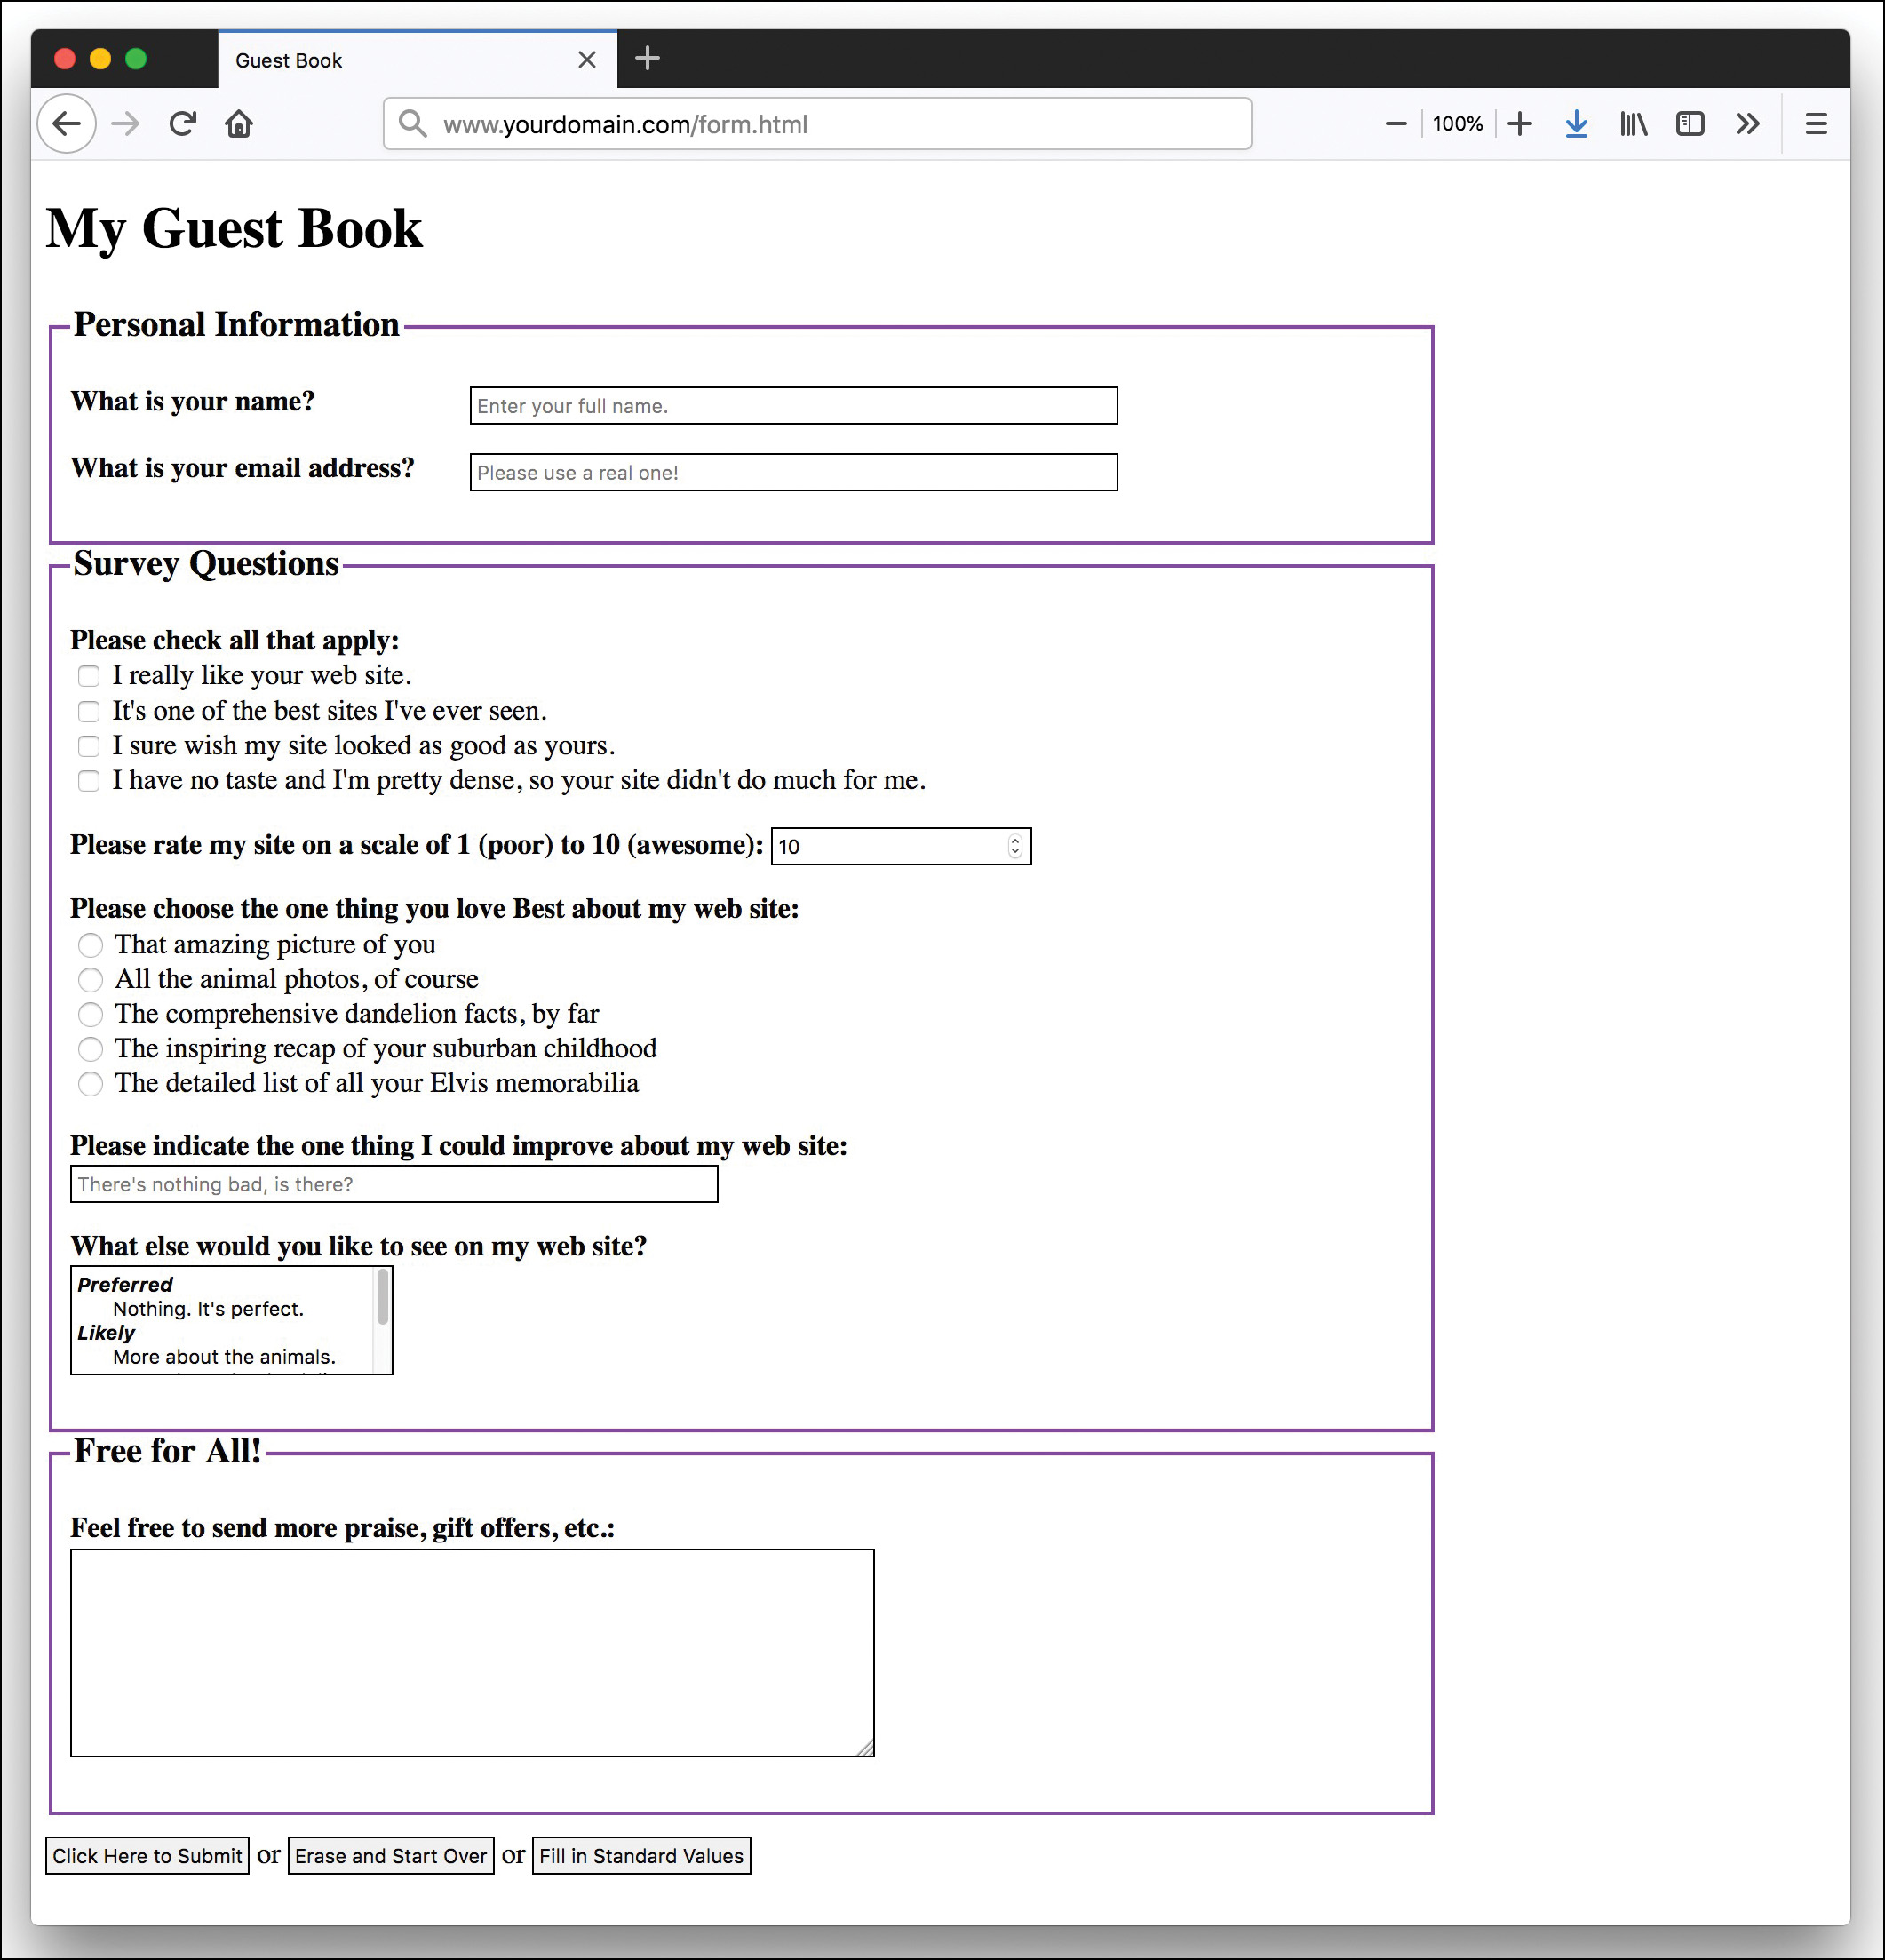 A screenshot of the Guest Book page that uses various user input components. The components are text fields, checkboxes, a spin box, a list box, and buttons.